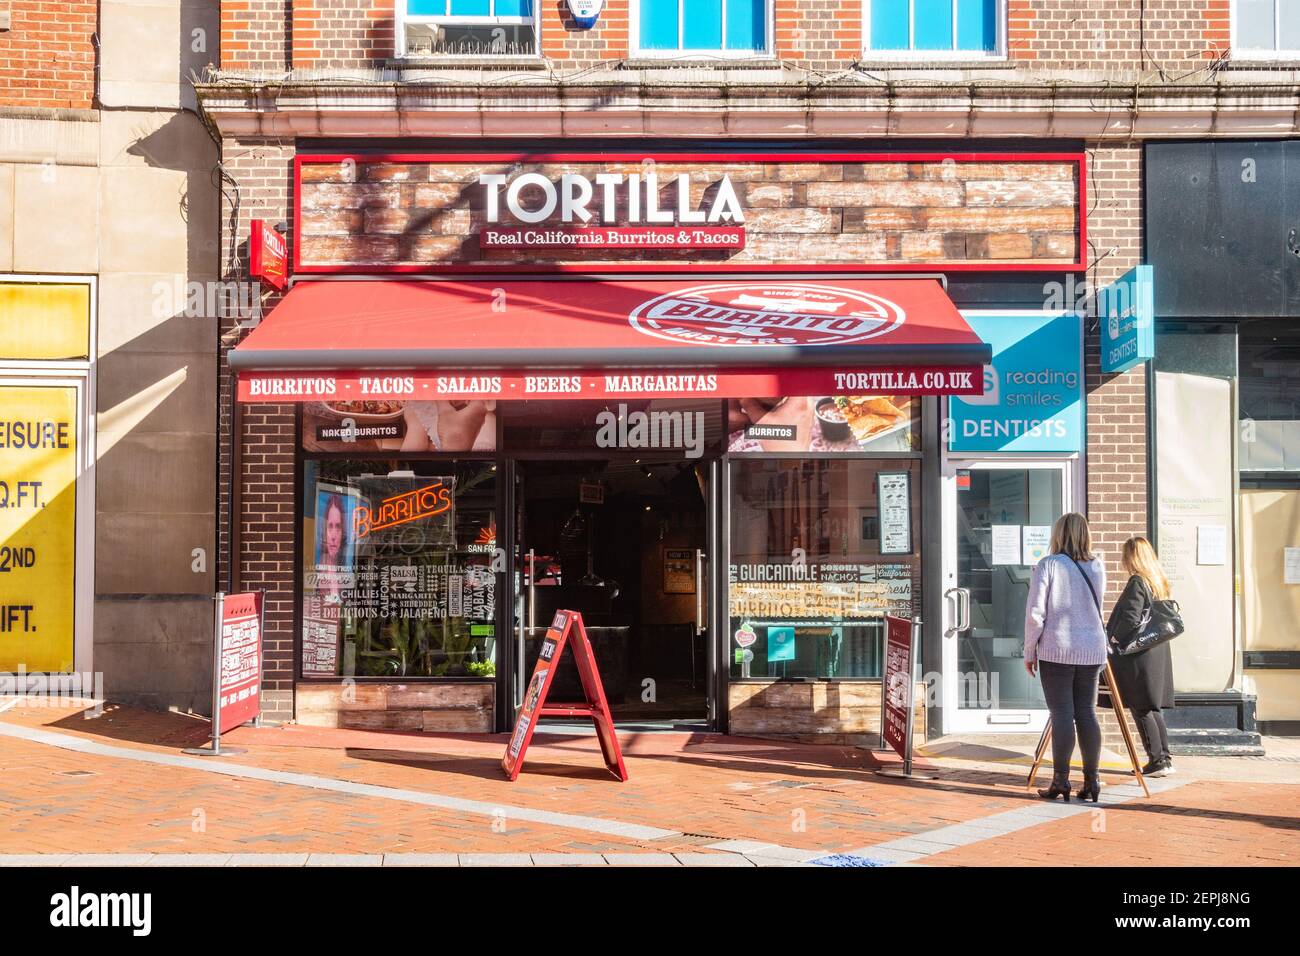 A Tex Mex restaurant called Tortilla on Broad Street in reading, UK is open for takeaways during the national lockdown in the UK Stock Photo